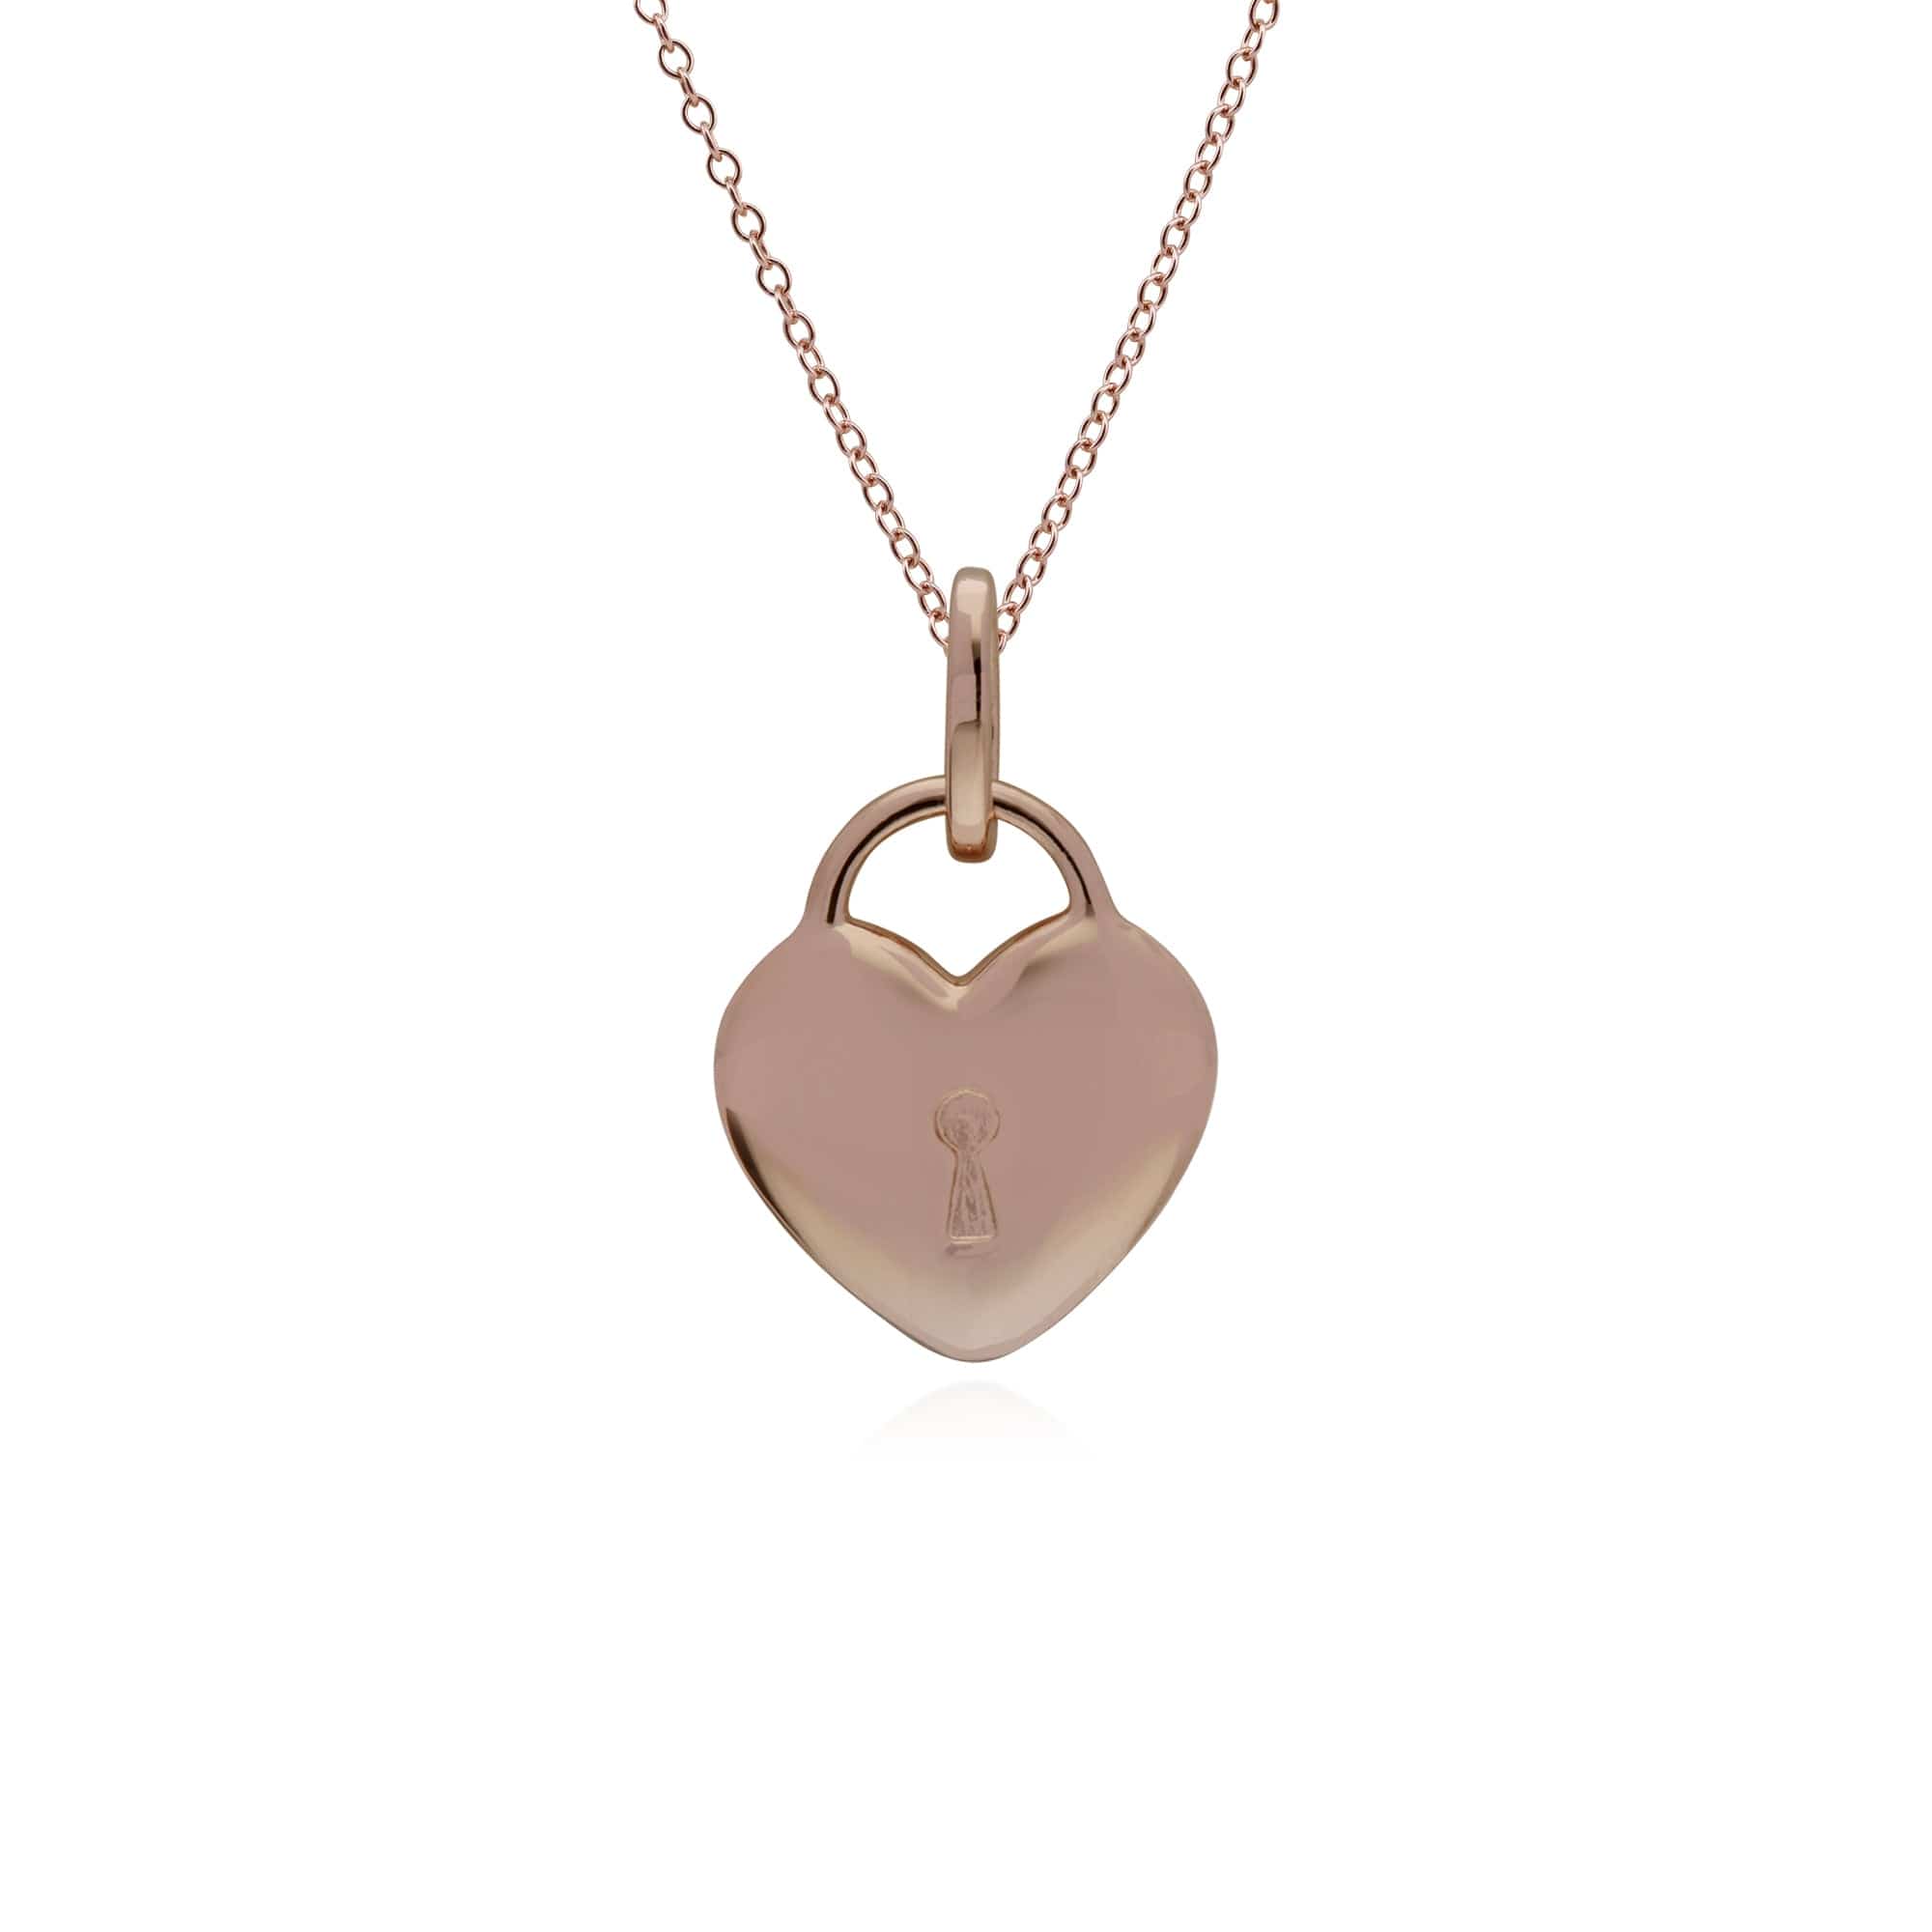 270P027307925-270P026901925 Classic Heart Lock Pendant & Aquamarine Charm in Rose Gold Plated 925 Sterling Silver 3